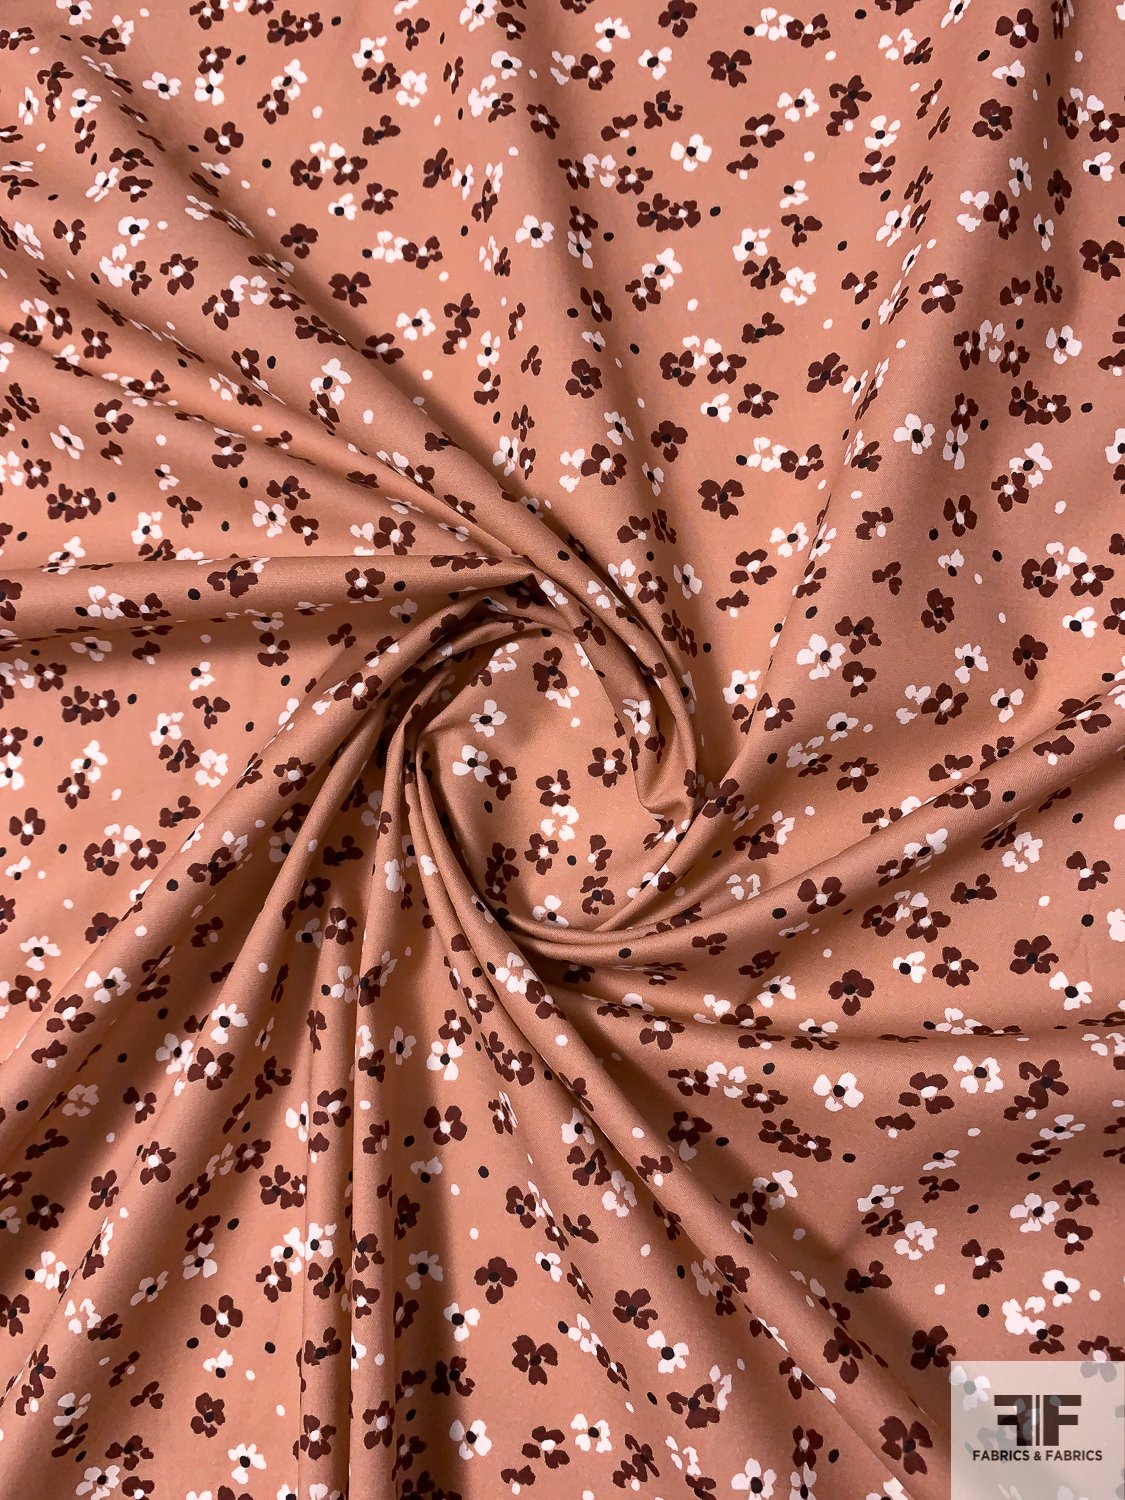 Ditsy Floral Printed Stretch Cotton Poplin - Tan / Brown / White / Black -  Fabric by the Yard